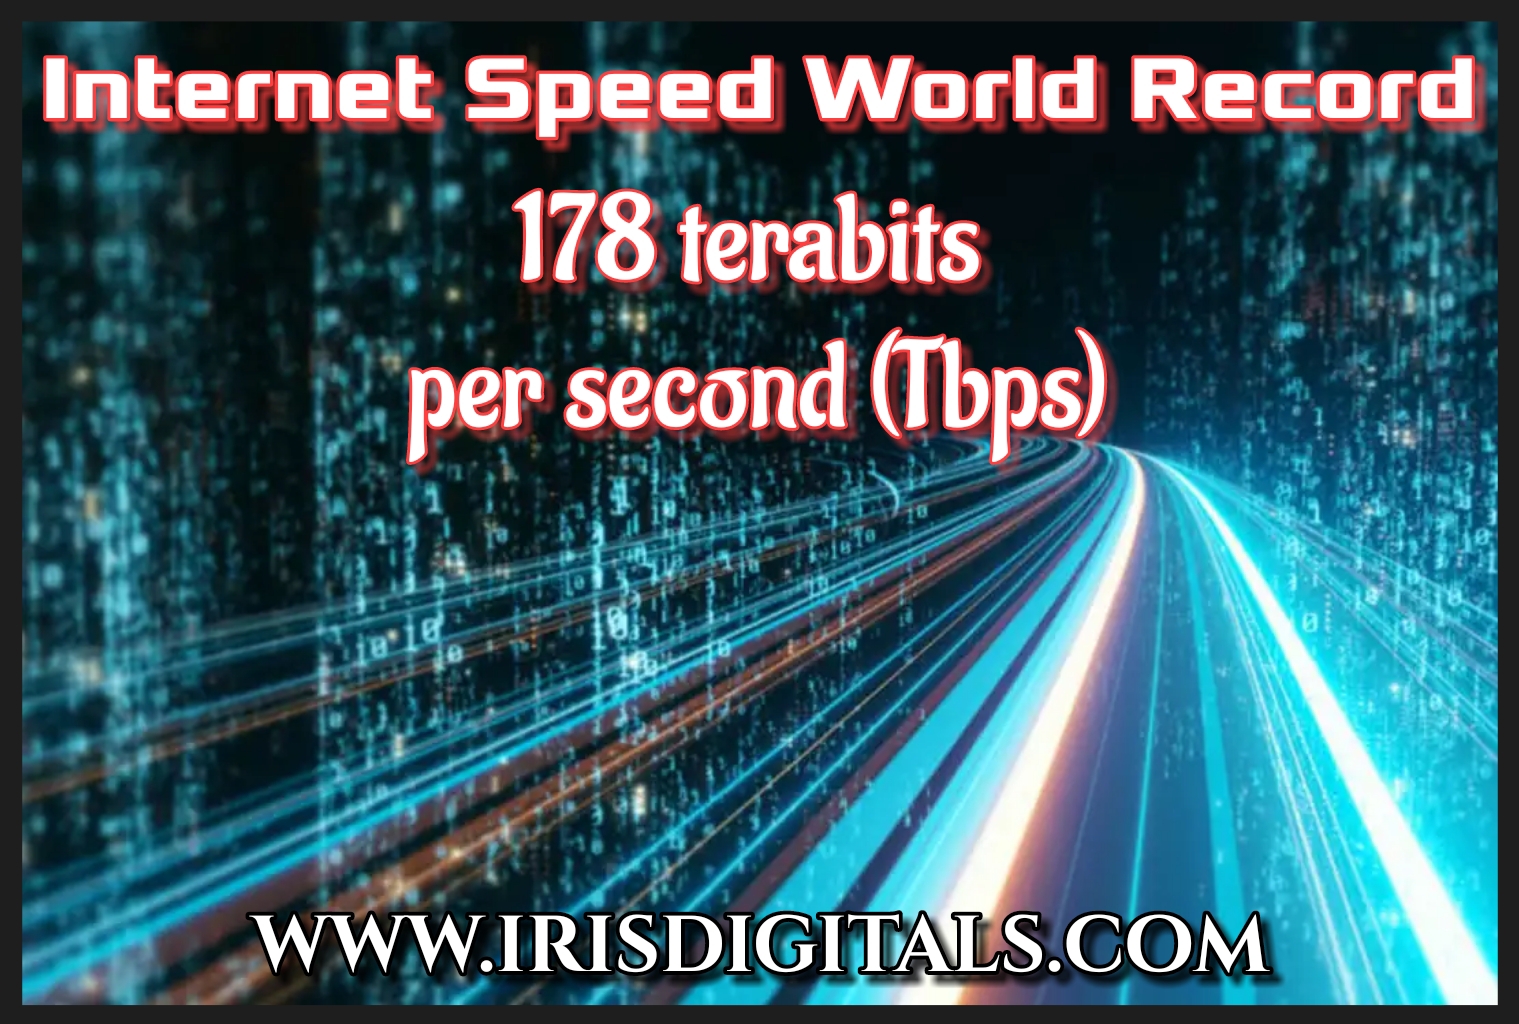 Internet speed world record, download everything from Netflix in 1 second.